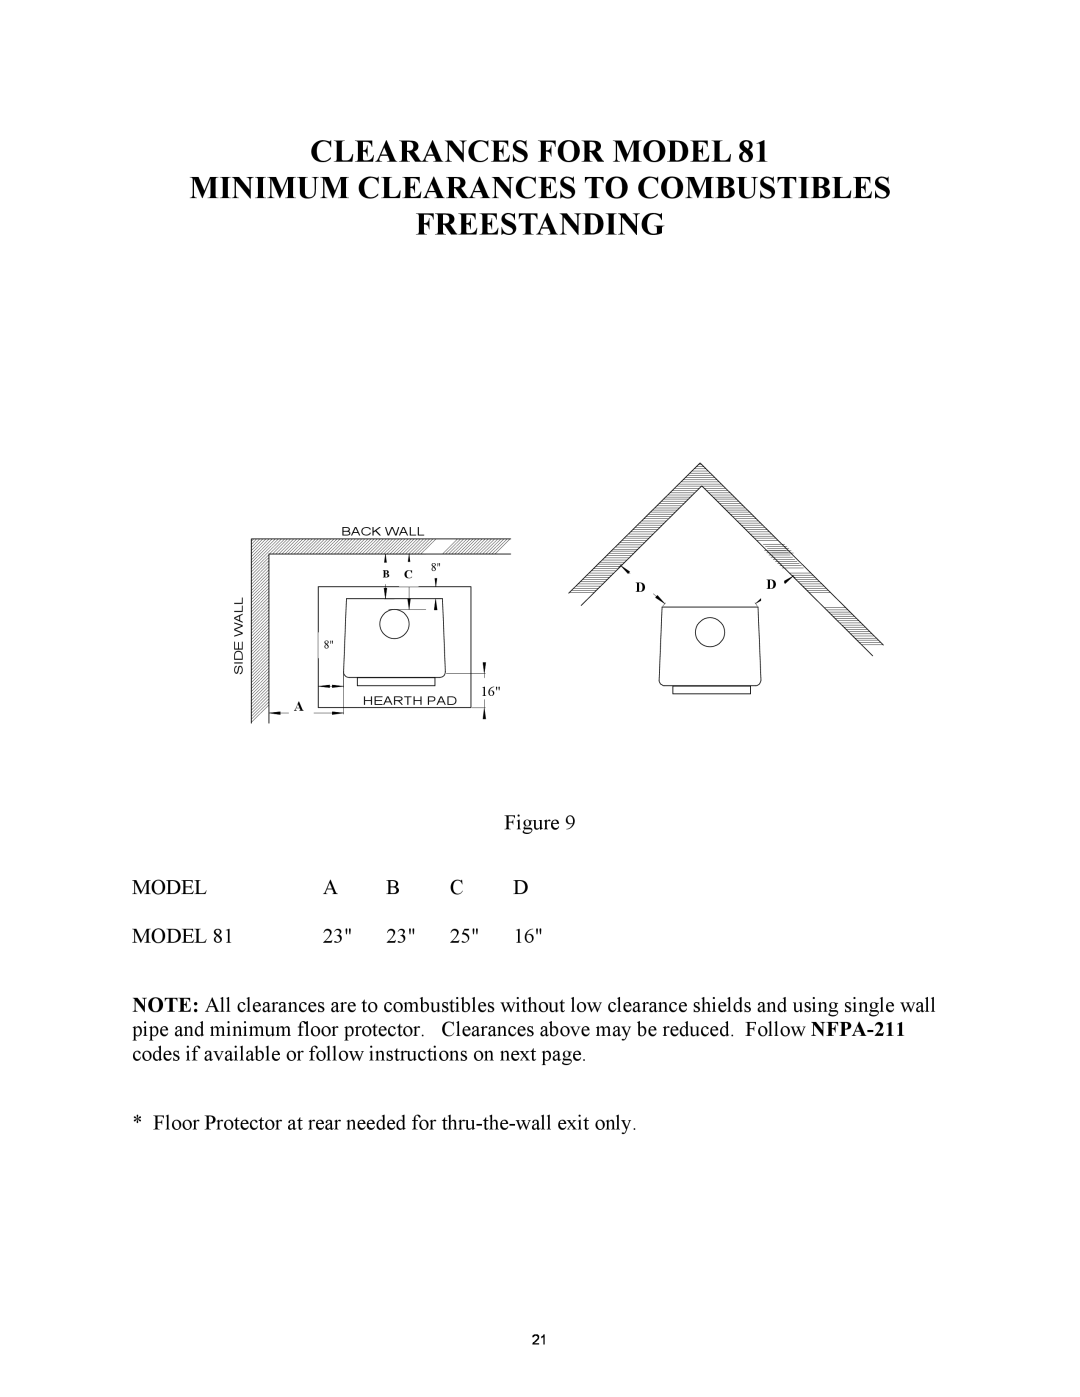 New Buck Corporation 81 installation instructions Clearances For Model, Minimum Clearances To Combustibles Freestanding 